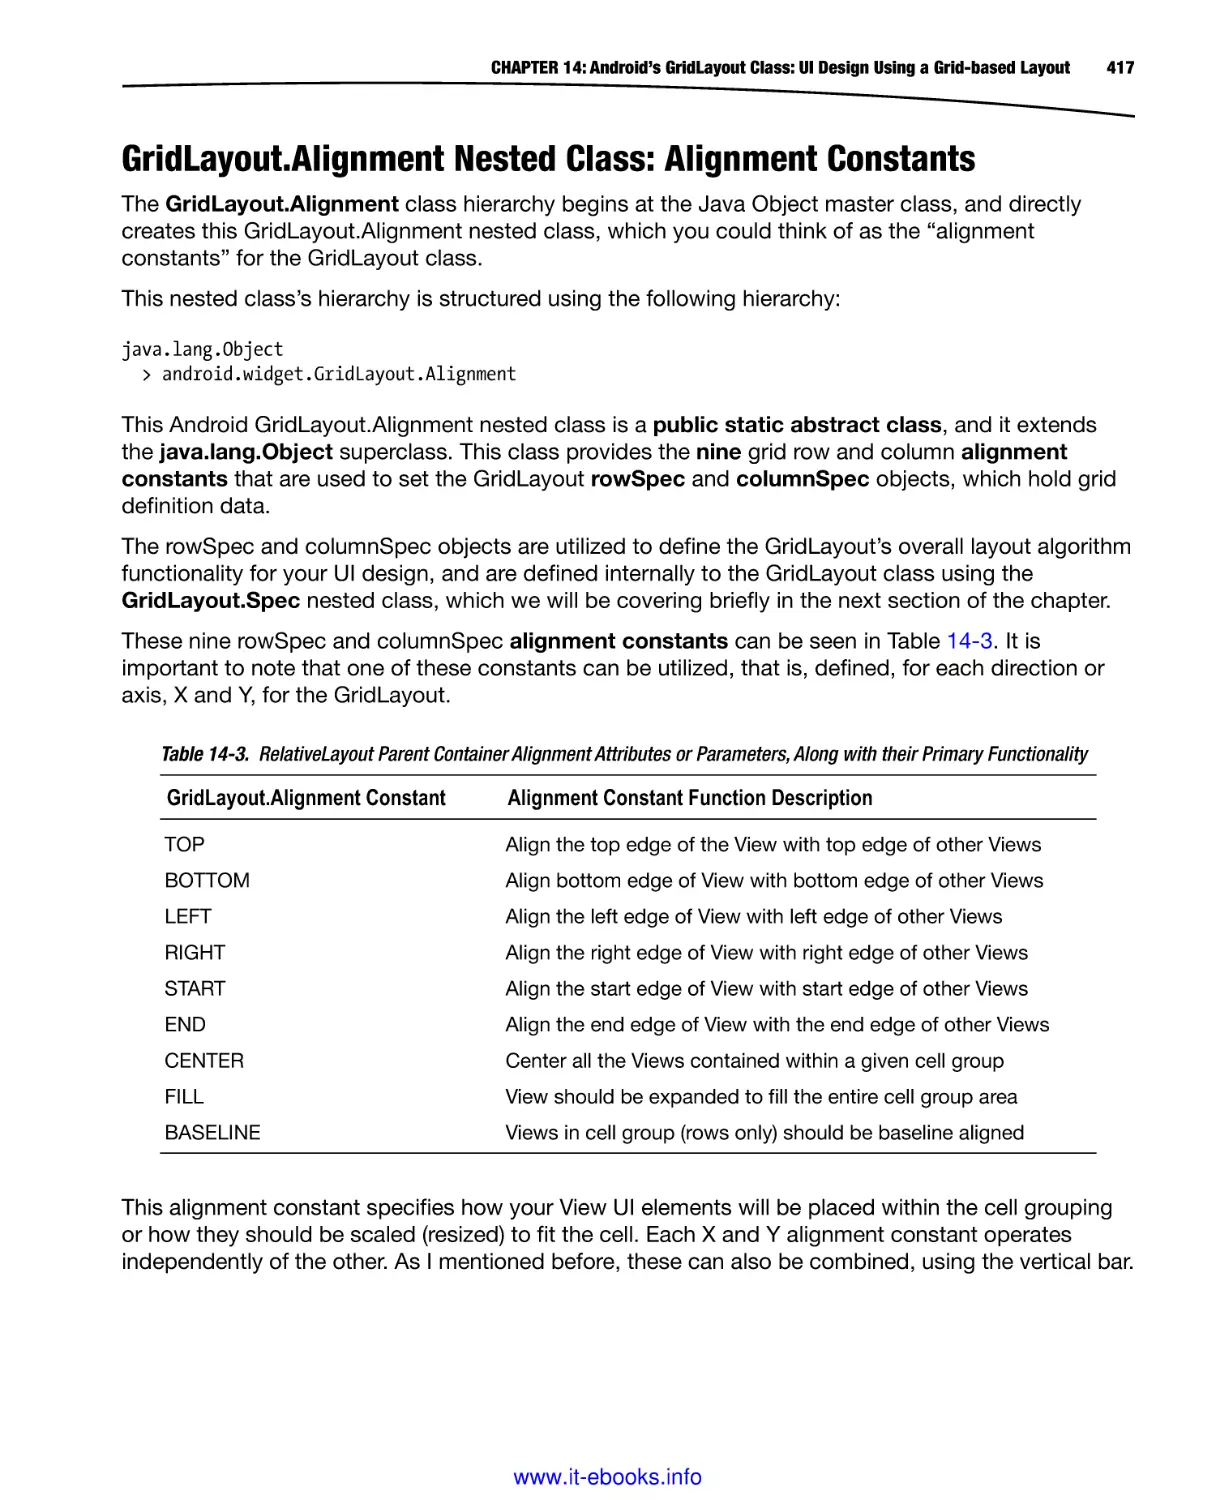 GridLayout.Alignment Nested Class